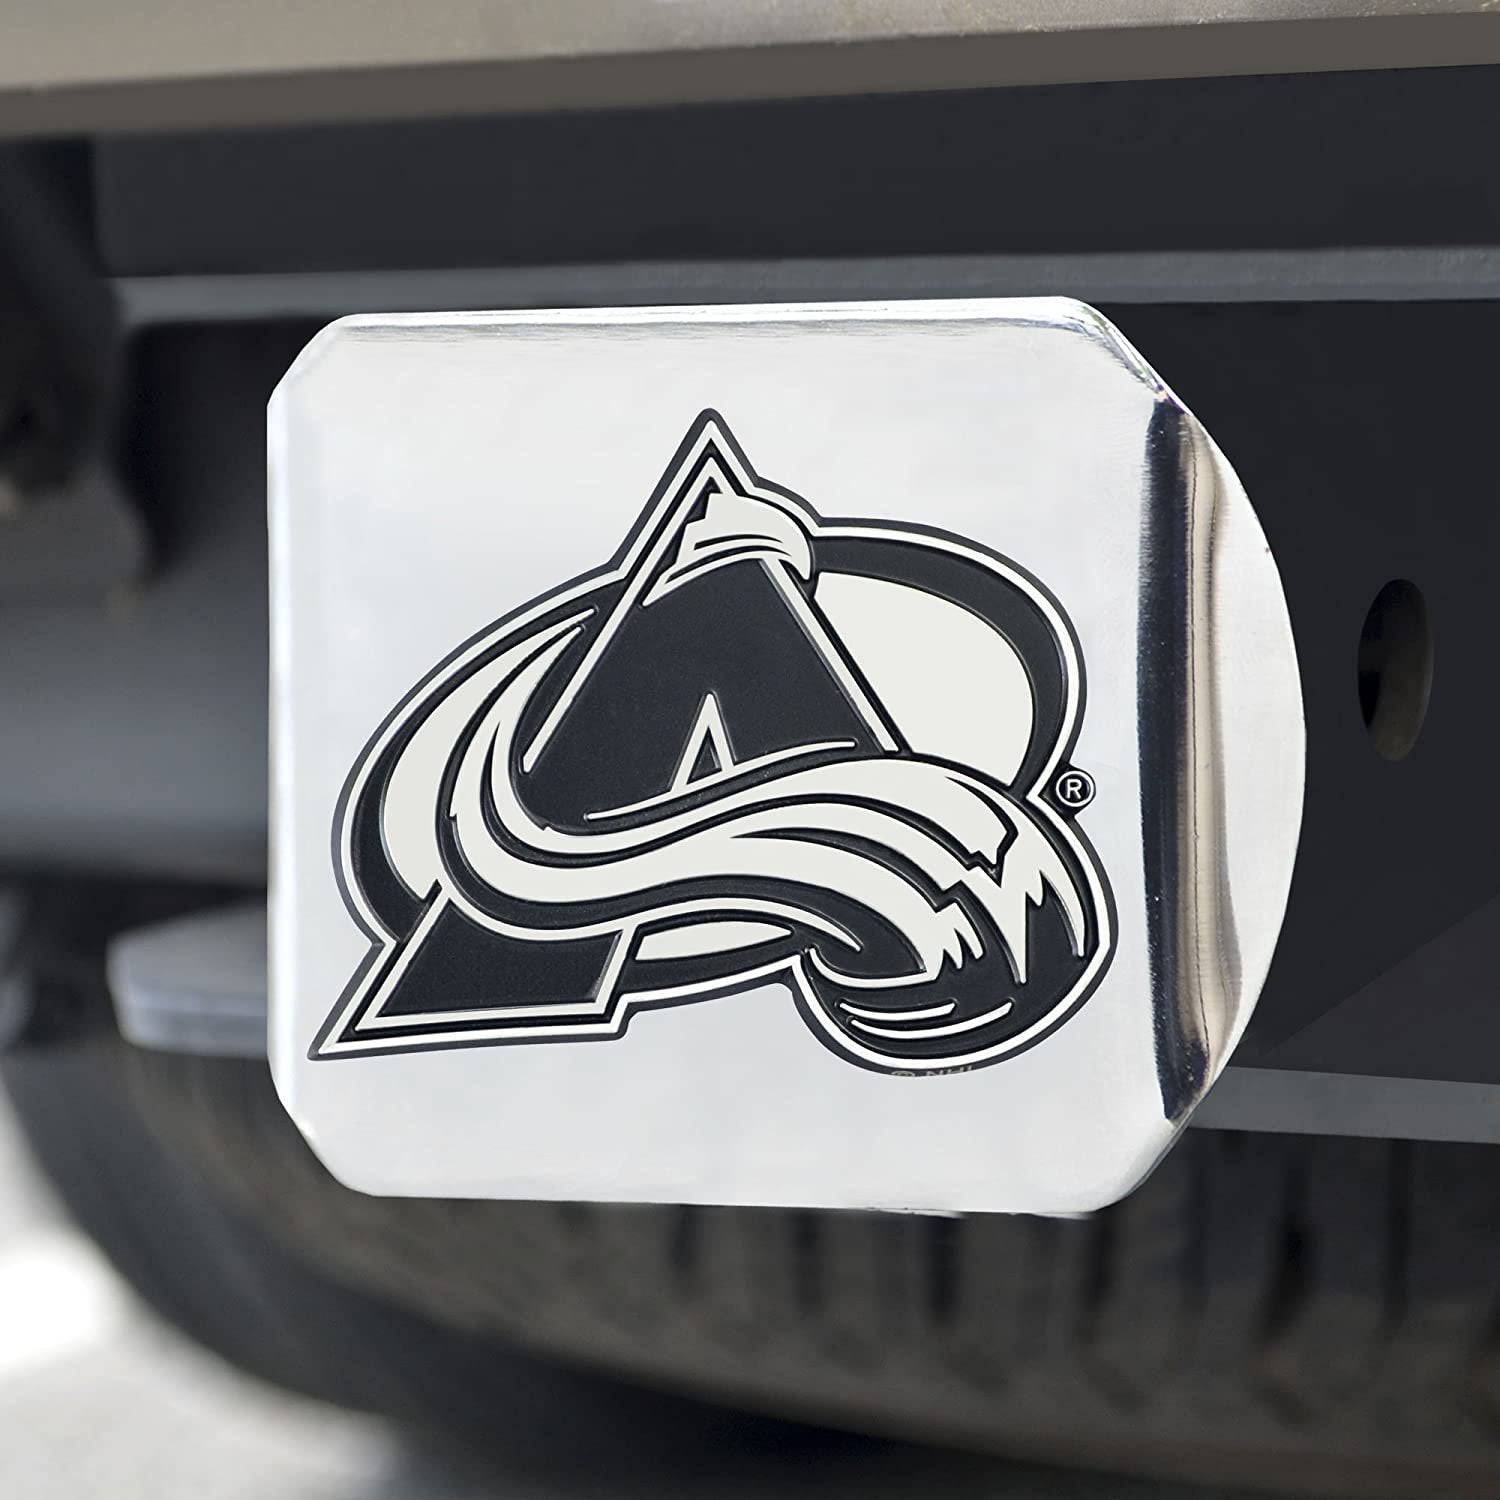 Colorado Avalanche Solid Metal Hitch Cover with Chrome Metal Emblem 2 Inch Square Type III